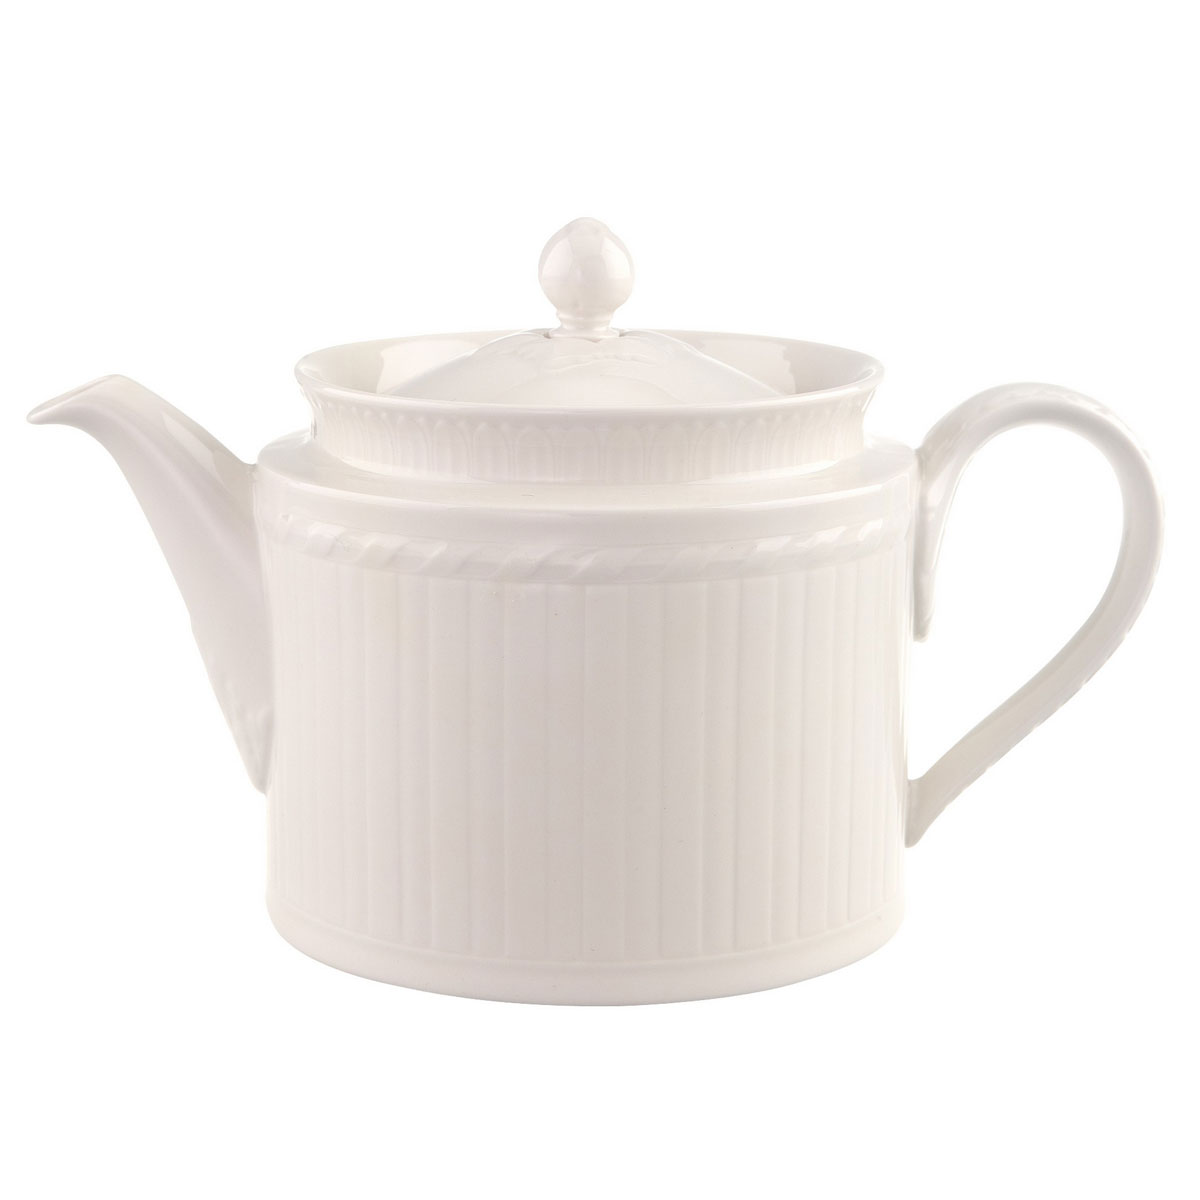 Villeroy and Boch Cellini Teapot